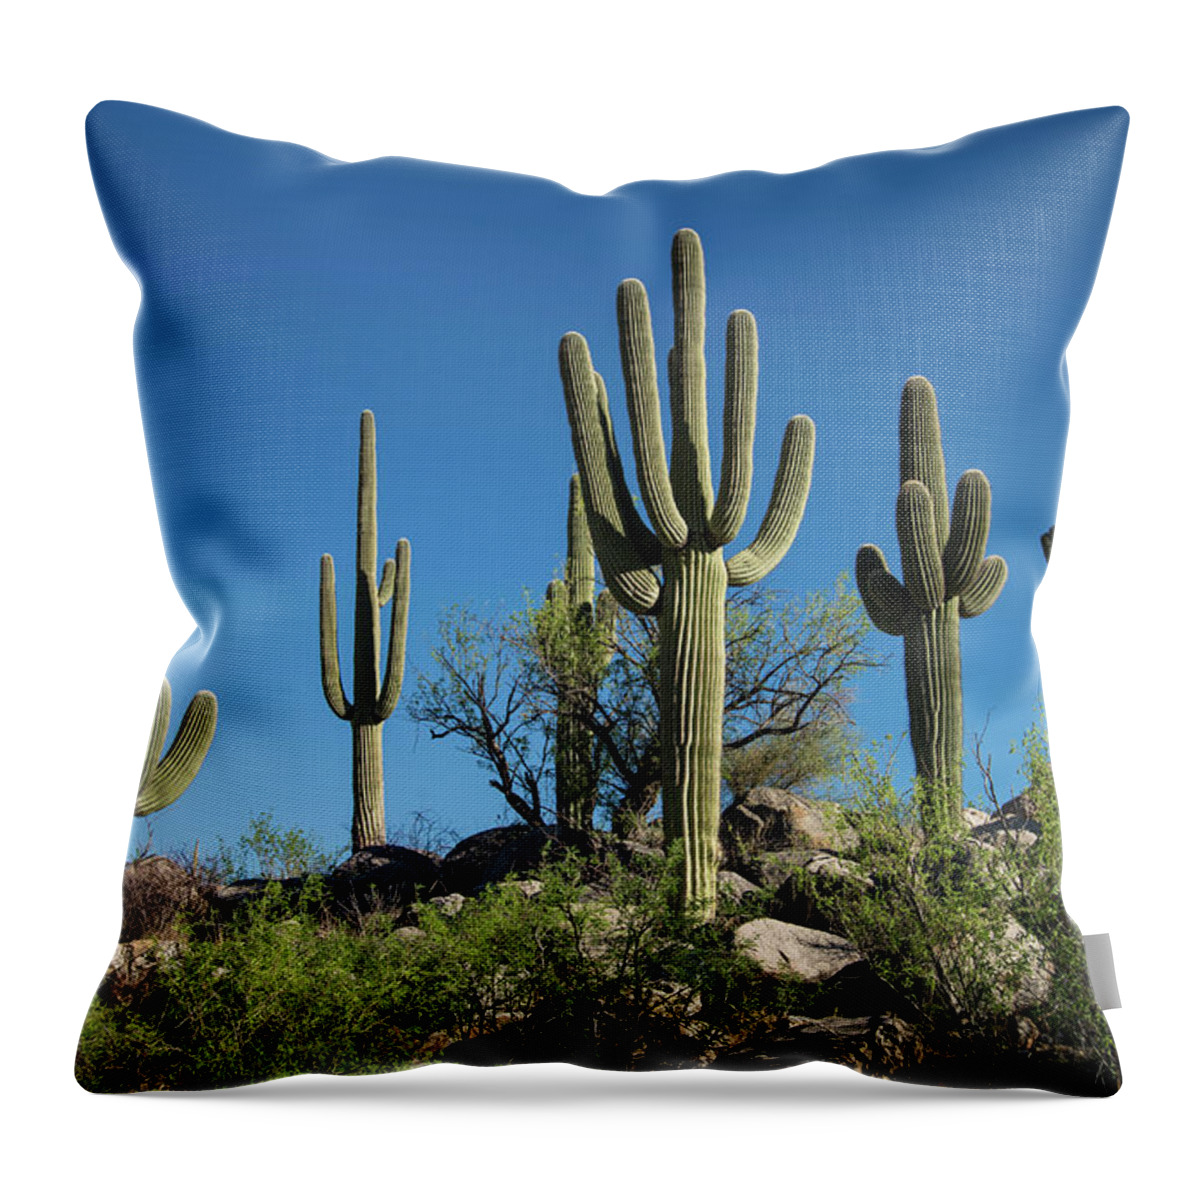 Tranquility Throw Pillow featuring the photograph Saguaro Cactus, Catalina State Park by Mark Newman